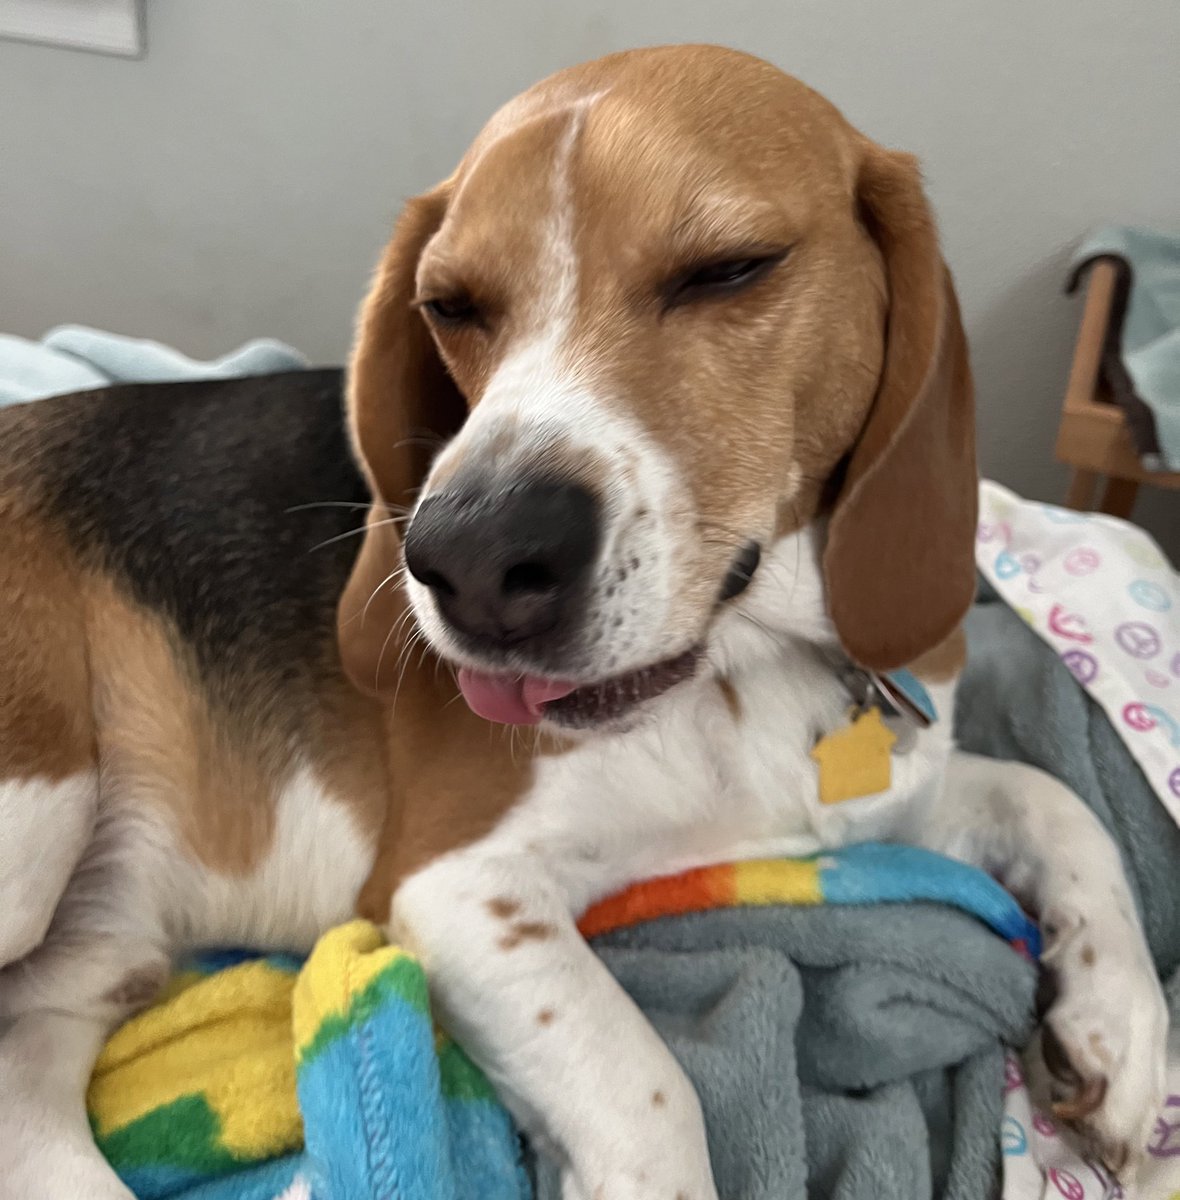 Here’s Bagel The Beagle with his #TongueOutTuesday.👅🥯🐶 #TOT #beagle #beagles #beaglesoftwitter #dog #dogs #dogsoftwitter #PAPups #DogsOfPA #DogsOfPennsylvania #PABeagles #houndsoftwitter #DogCommunity #CoopTroop